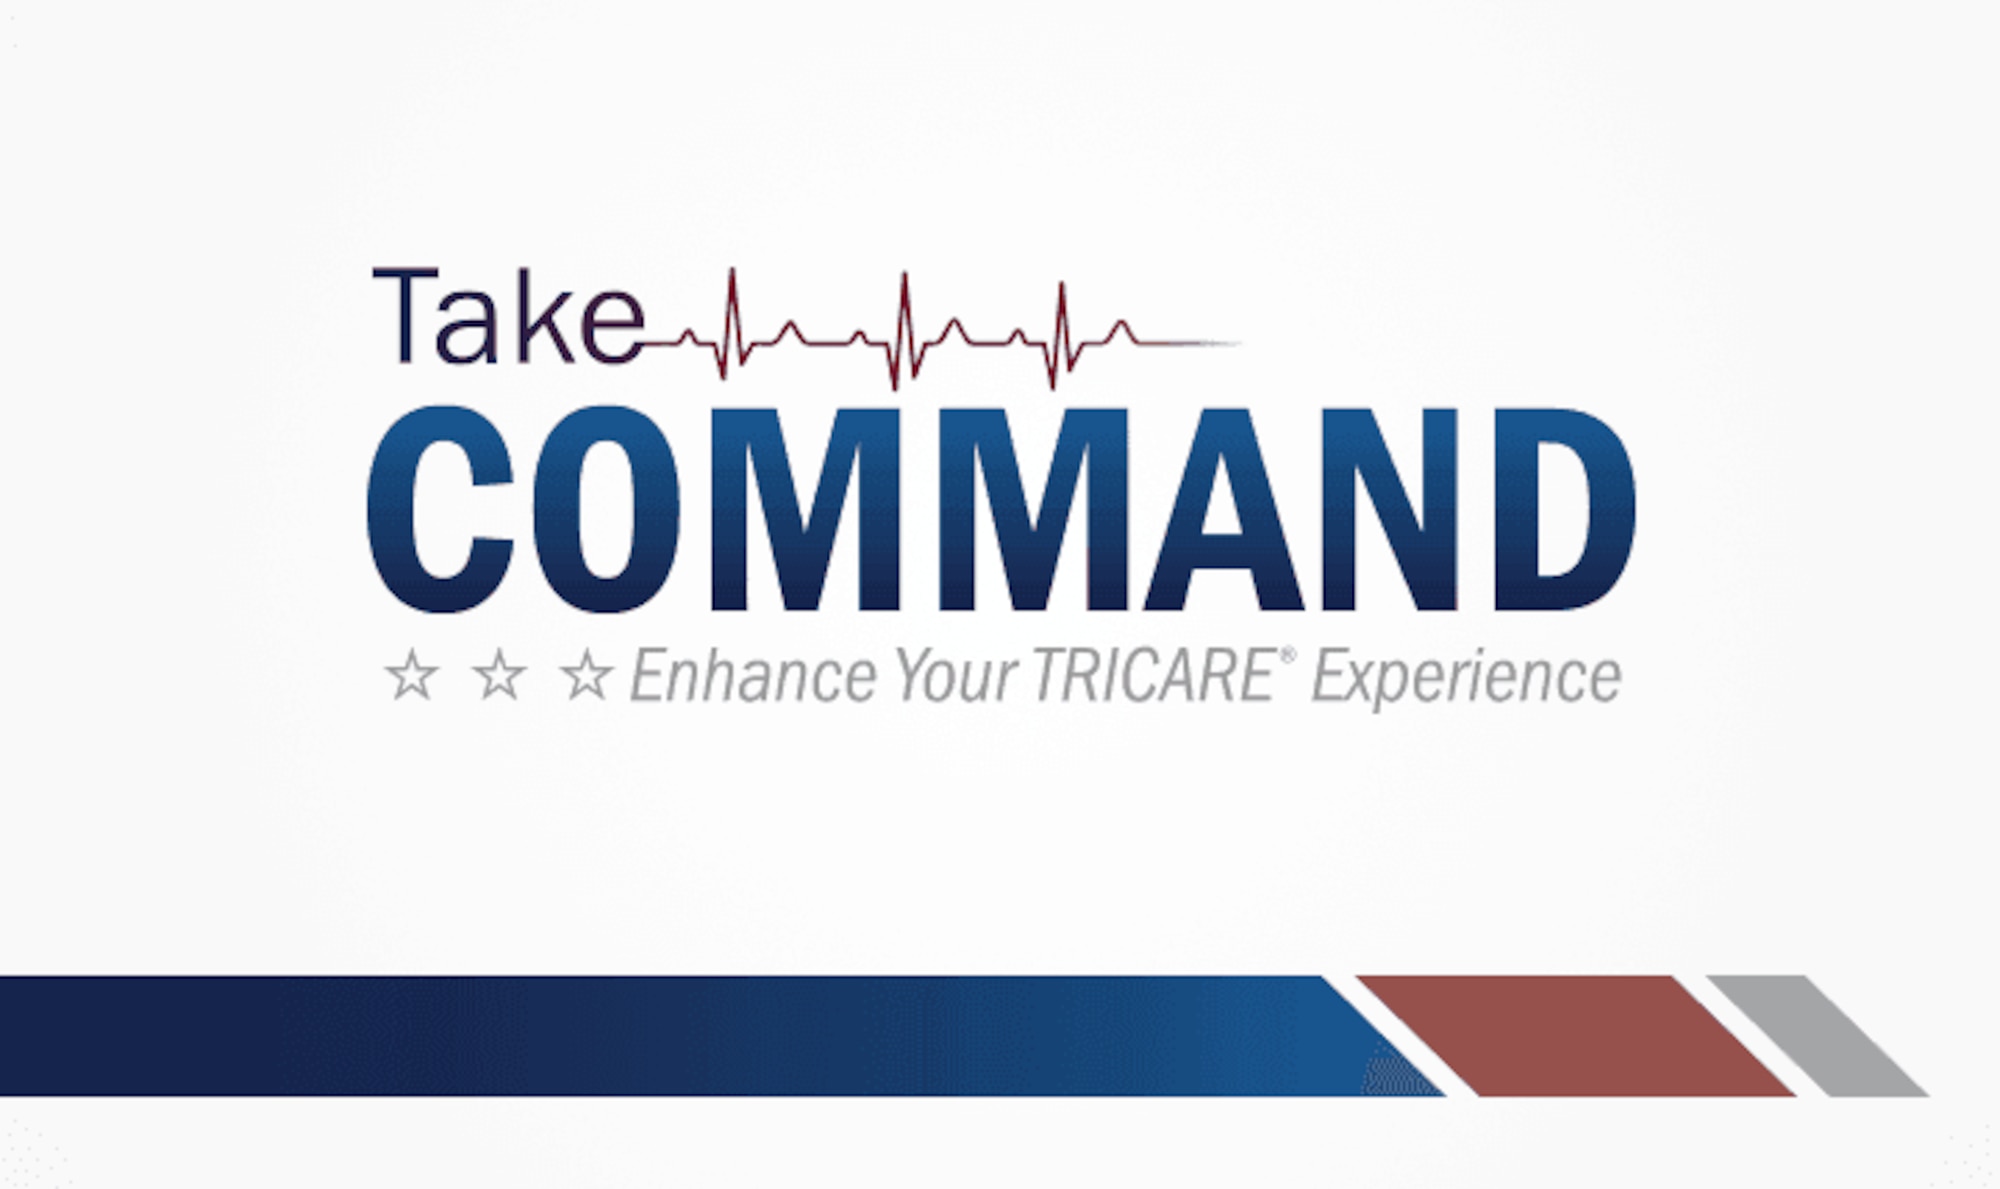 On Feb. 1, 2018, copayments for prescription drugs at TRICARE Pharmacy Home Delivery and retail pharmacies will increase. These changes are required by law and affect TRICARE beneficiaries who are not active duty service members. To see the new TRICARE pharmacy copayments, visit www.tricare.mil/pharmacycosts. To learn more about the TRICARE Pharmacy Program, or move your prescriptions to home delivery, visit www.tricare.mil/pharmacy. (courtesy photo)